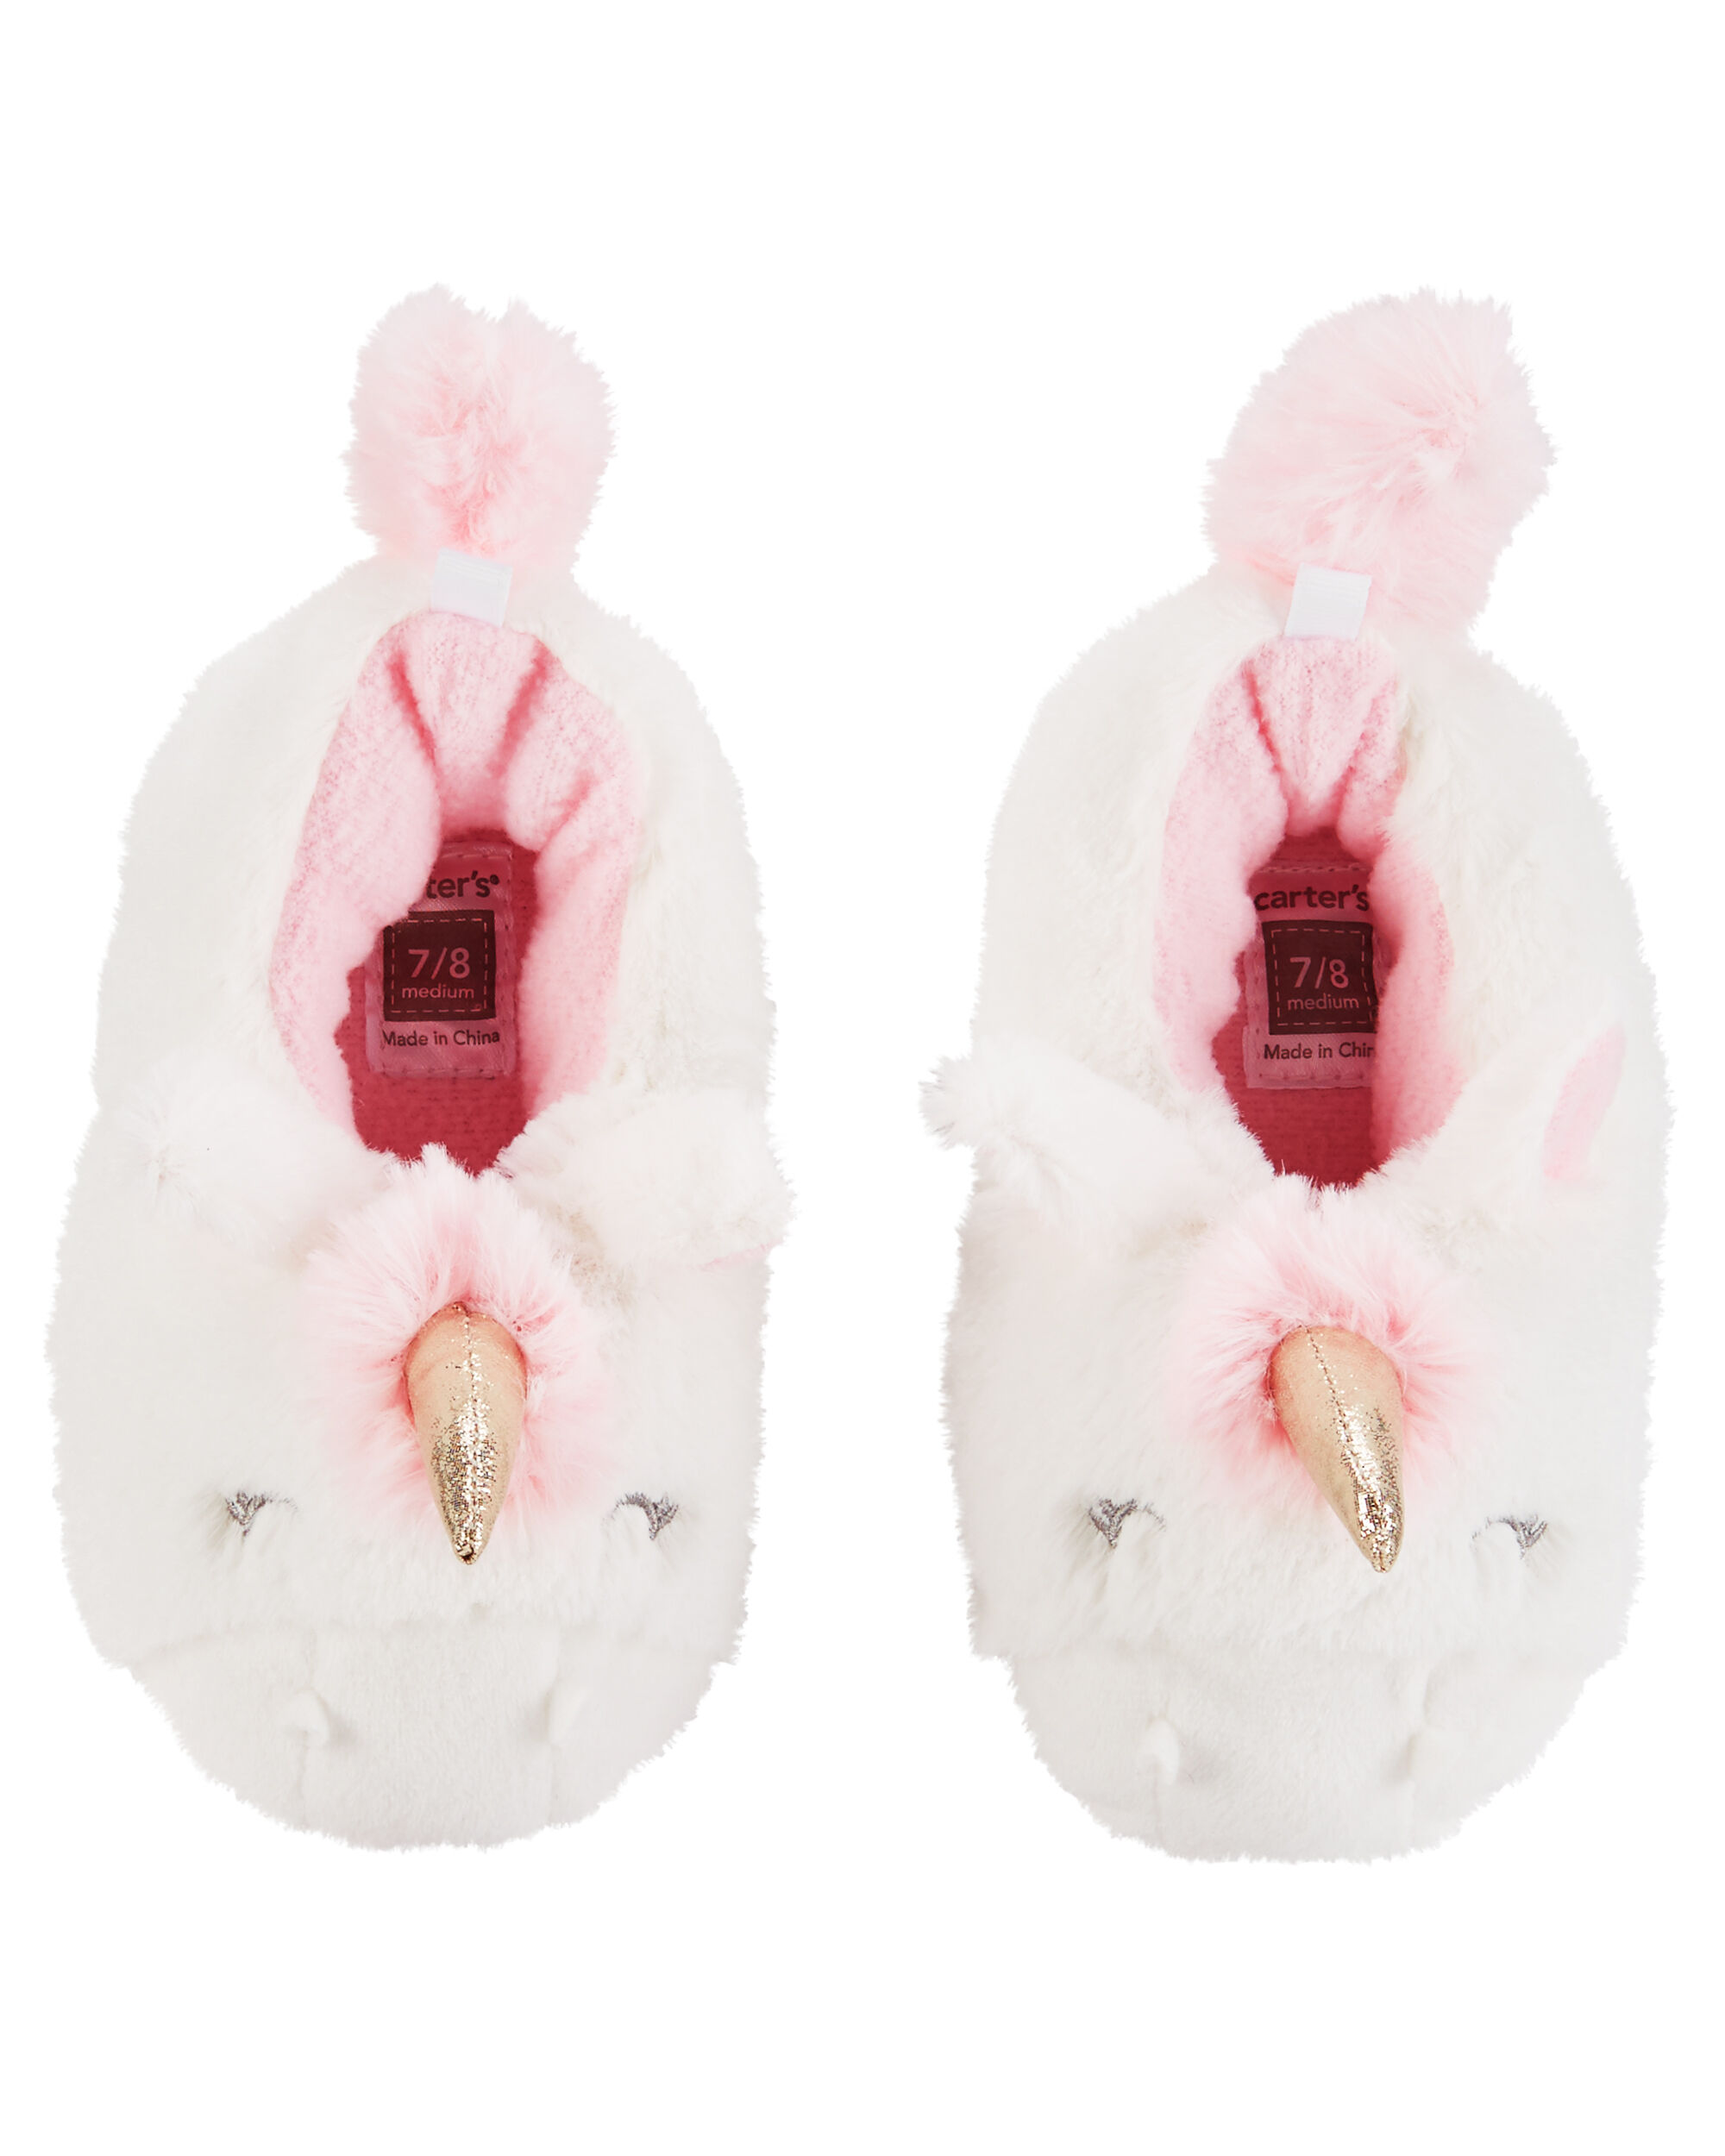 carters kids slippers